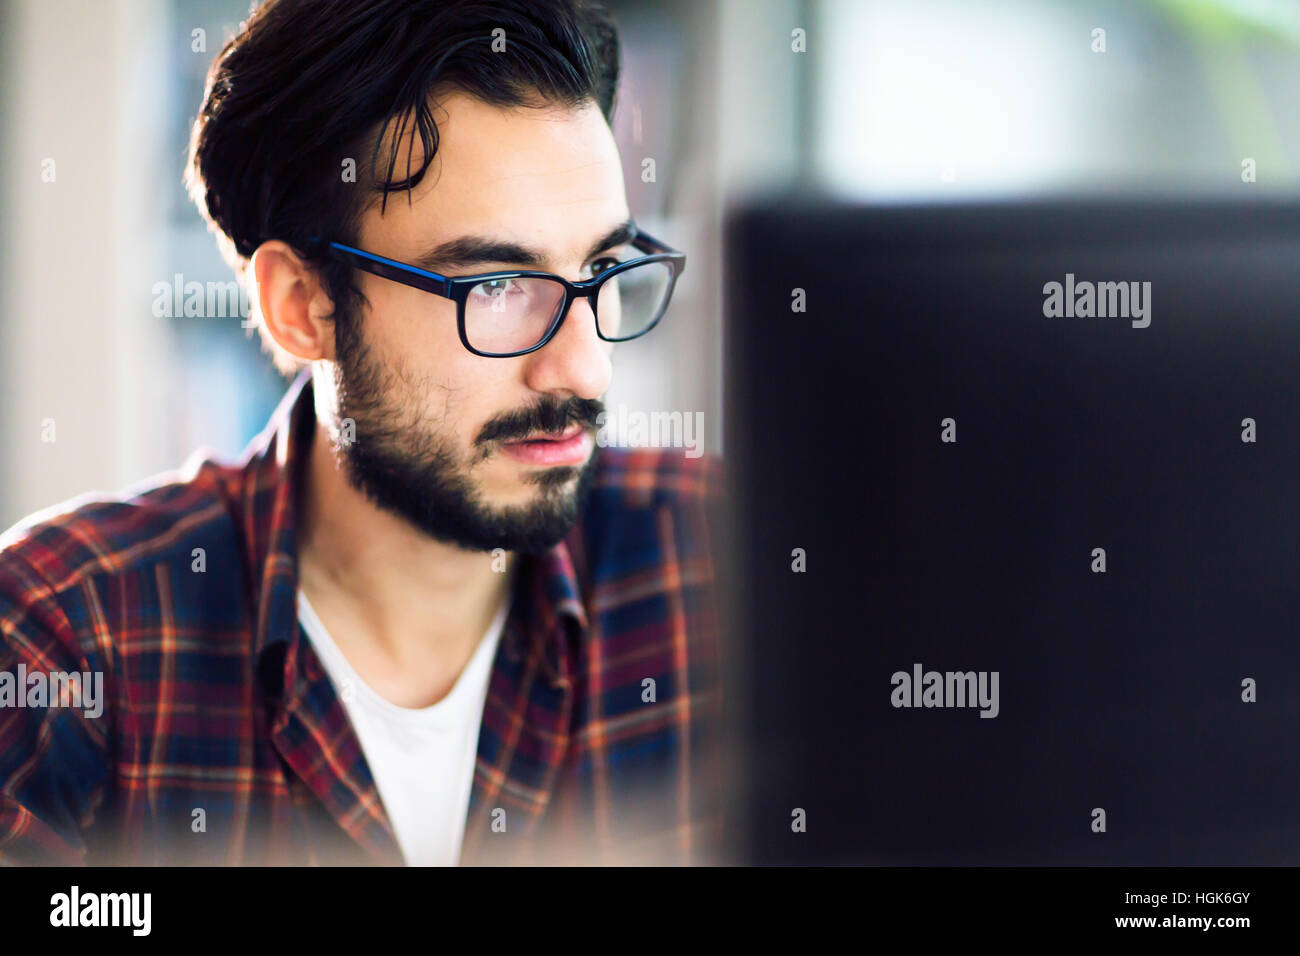 Programmer working at software development company office Stock Photo